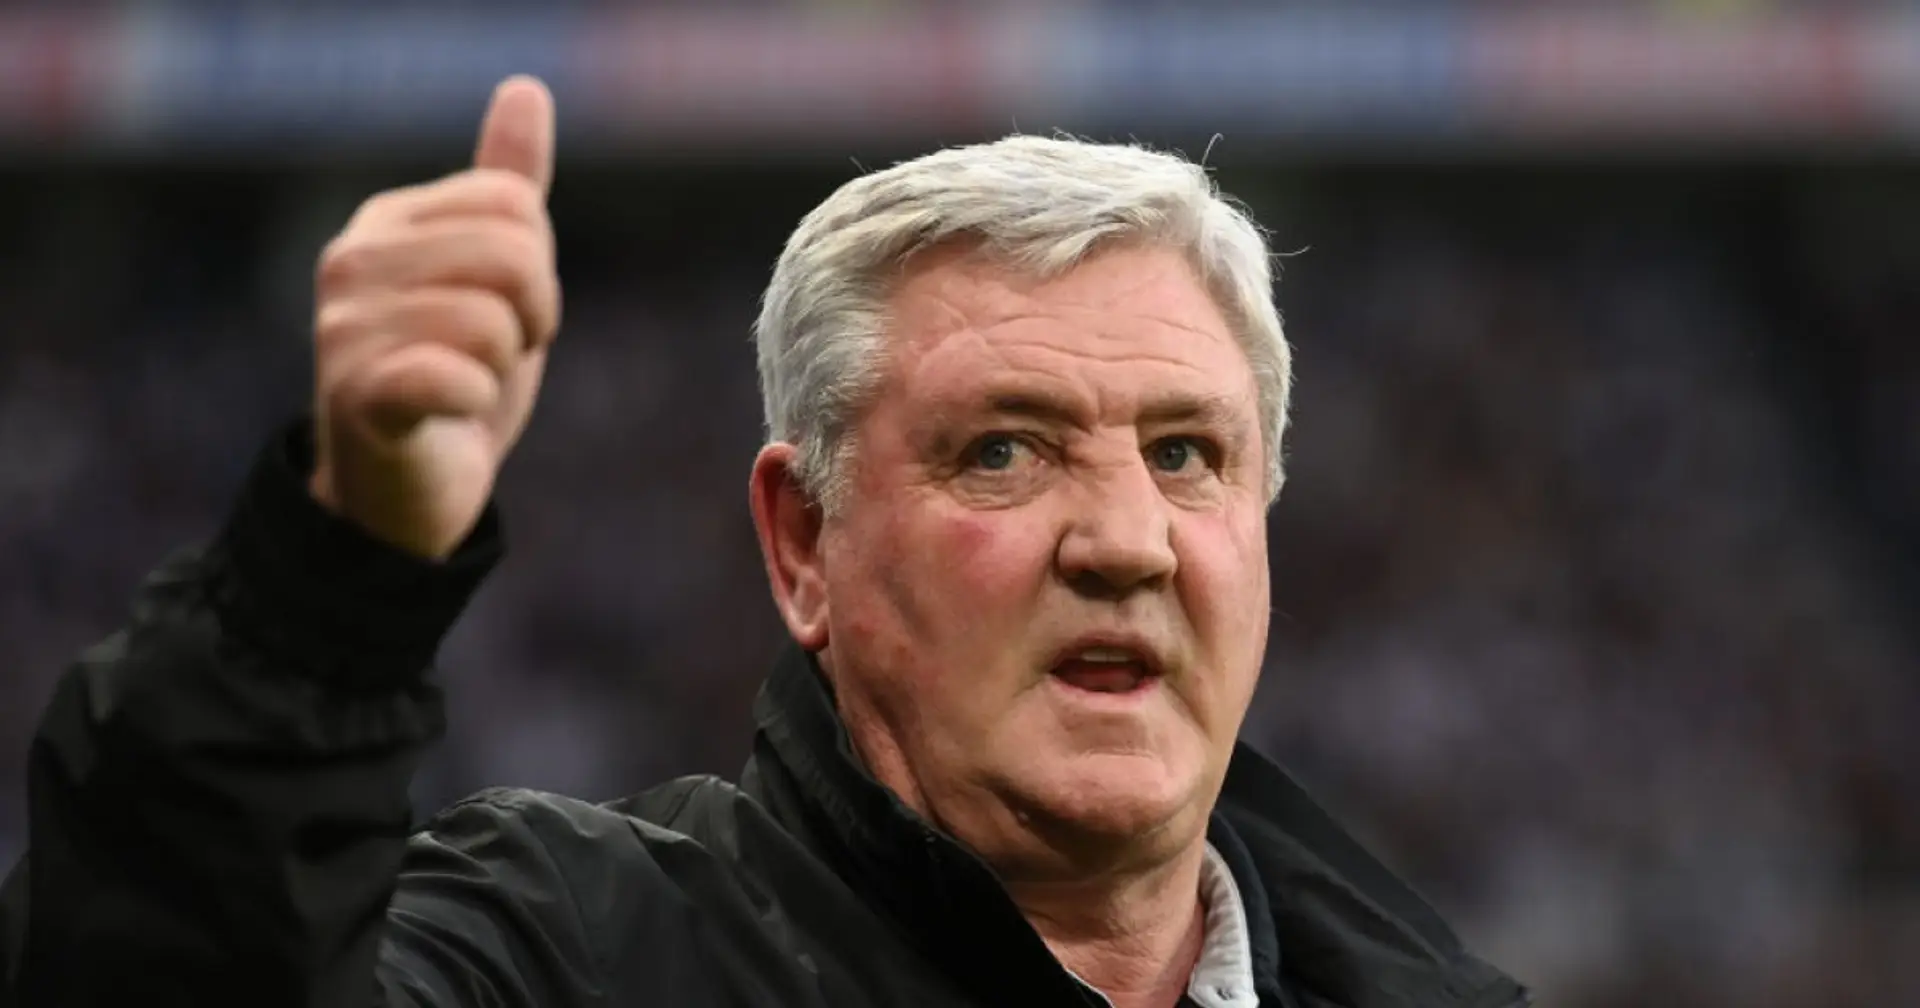 Steve Bruce's agent contacts Man United & 3 more under-radar stories at Old Trafford today